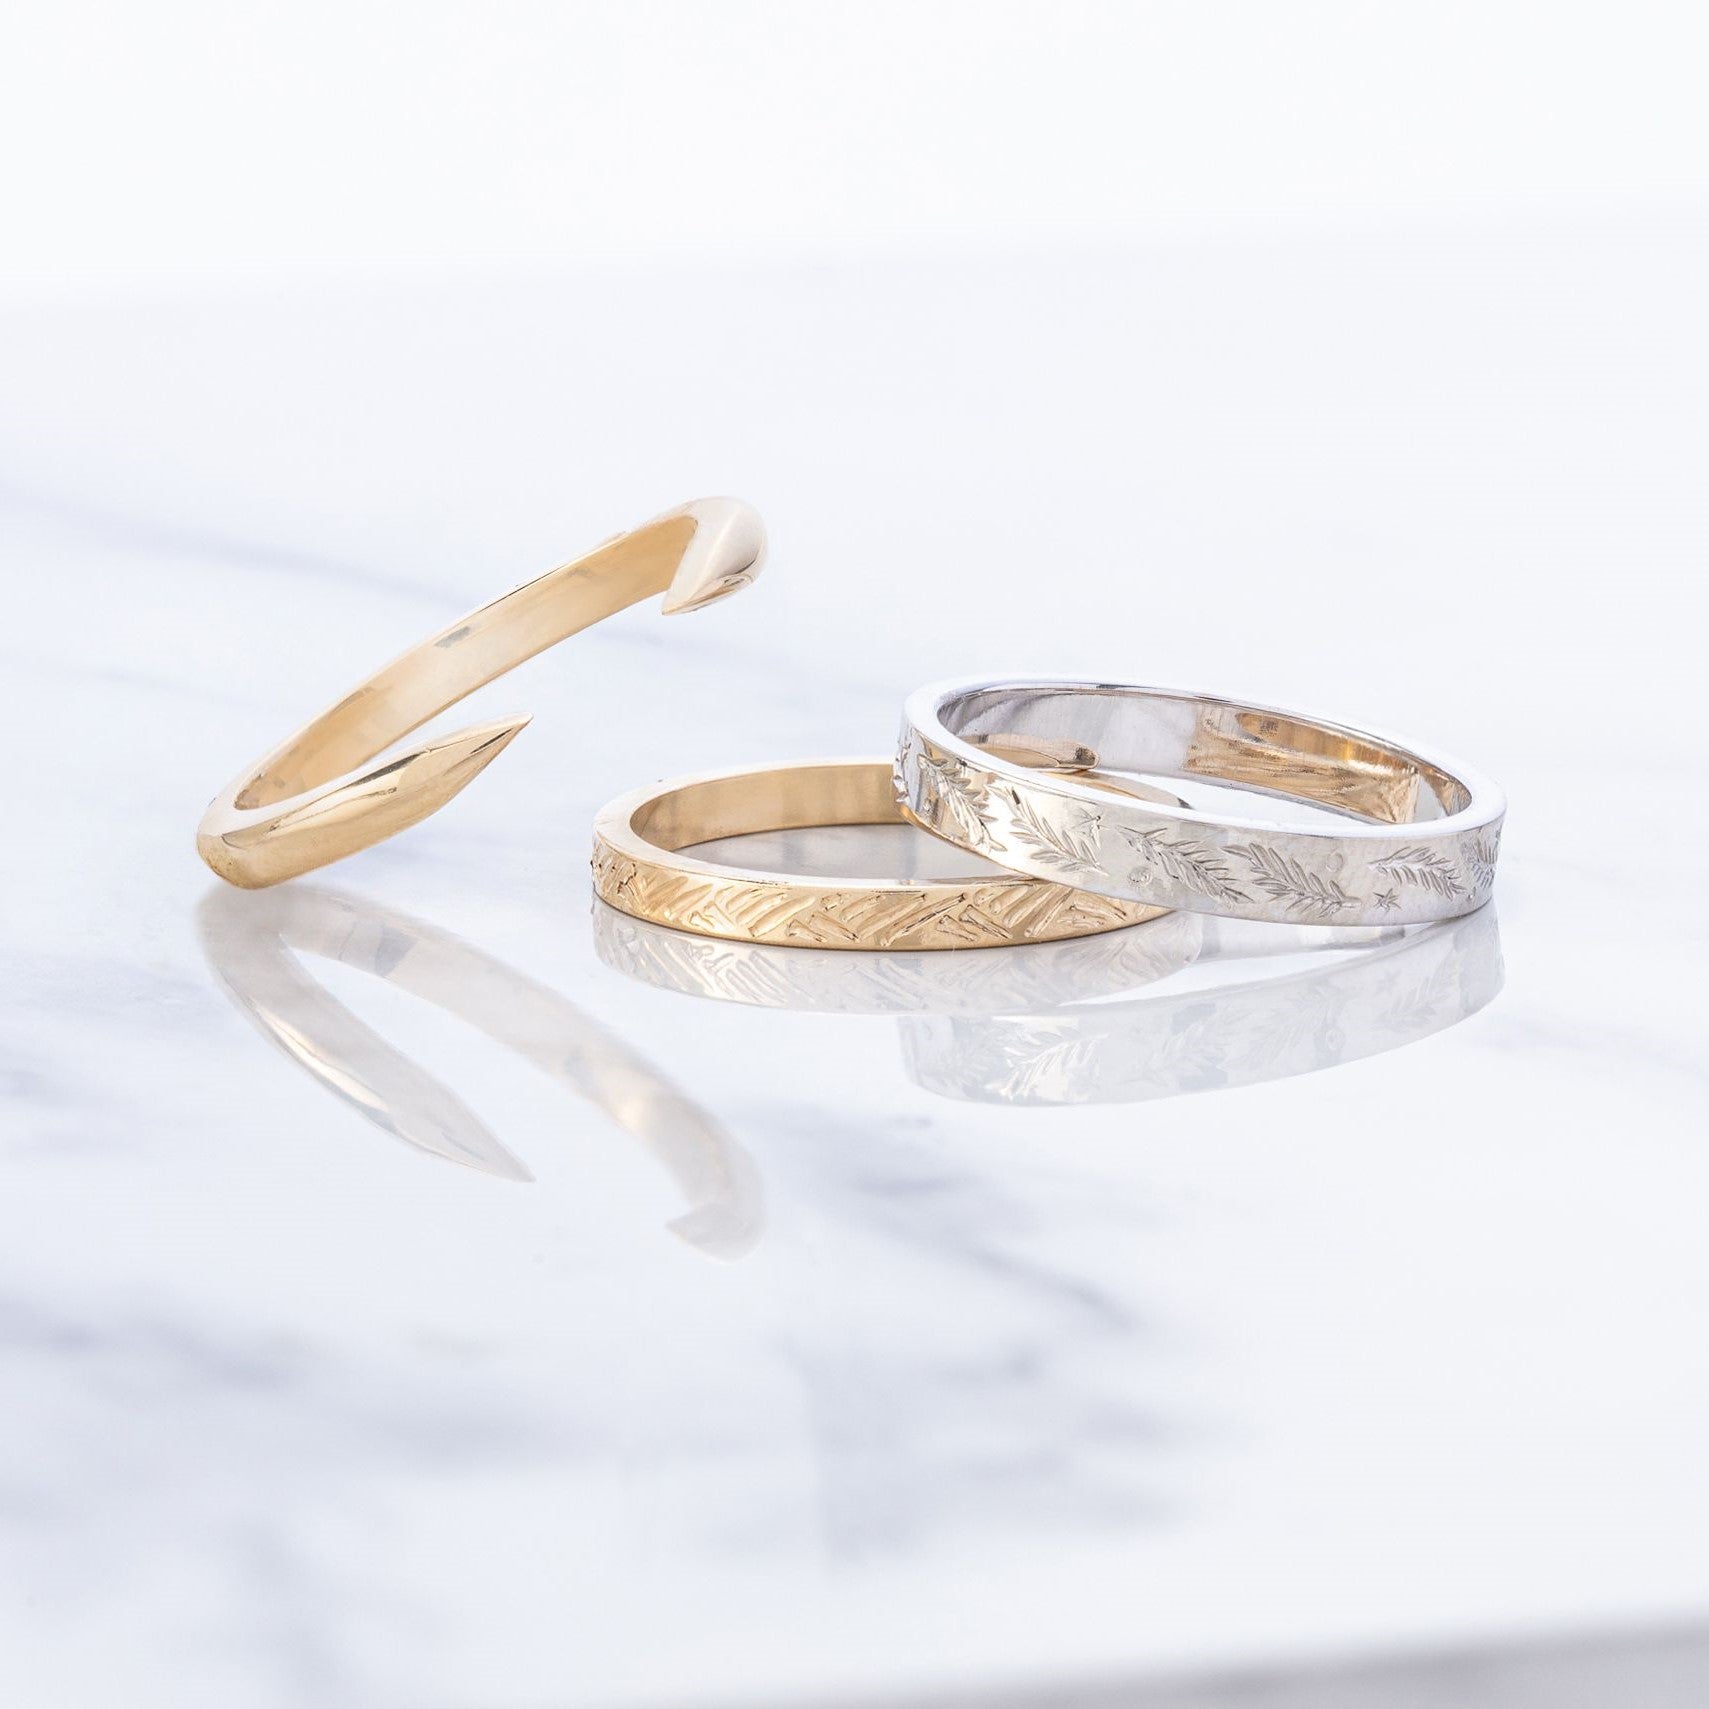 Louis Vuitton wedding bands to embark on a lifetime journey filled with LV-love  - Pursuitist